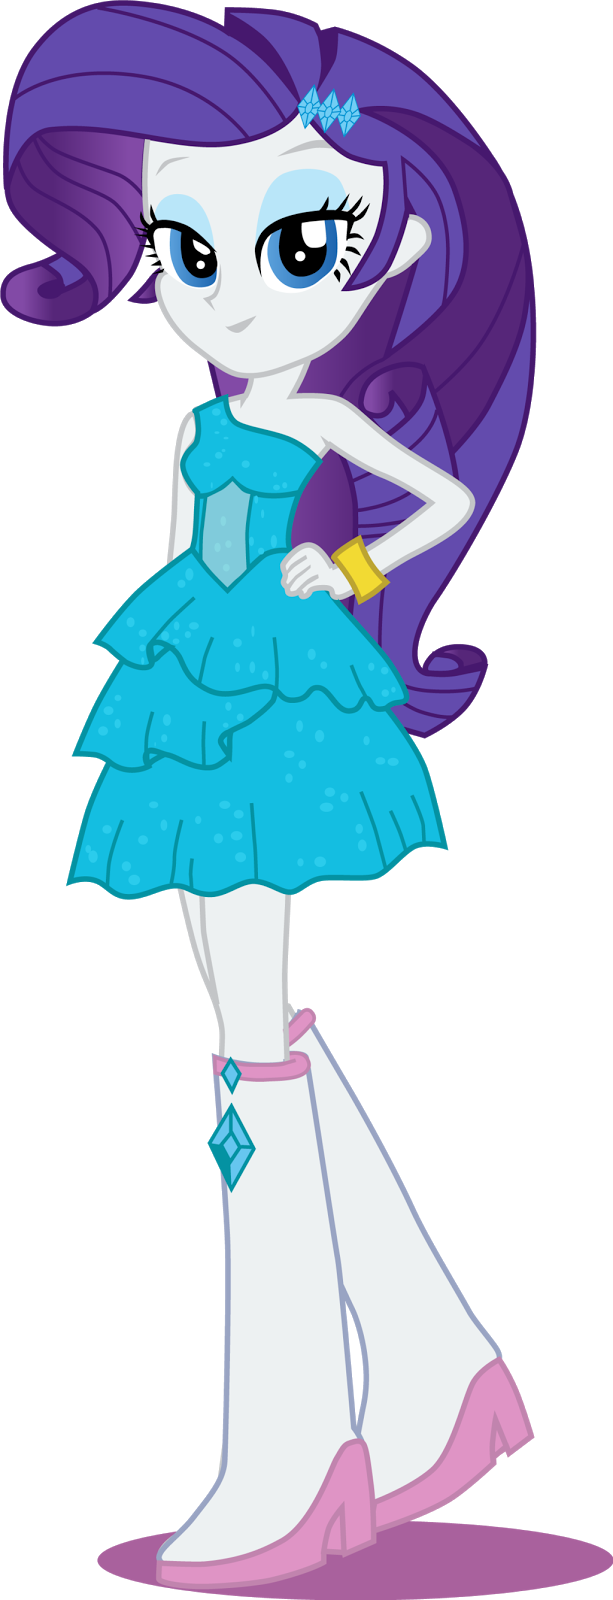 Wallpaper Pictures Image And Photos Equestria Girls